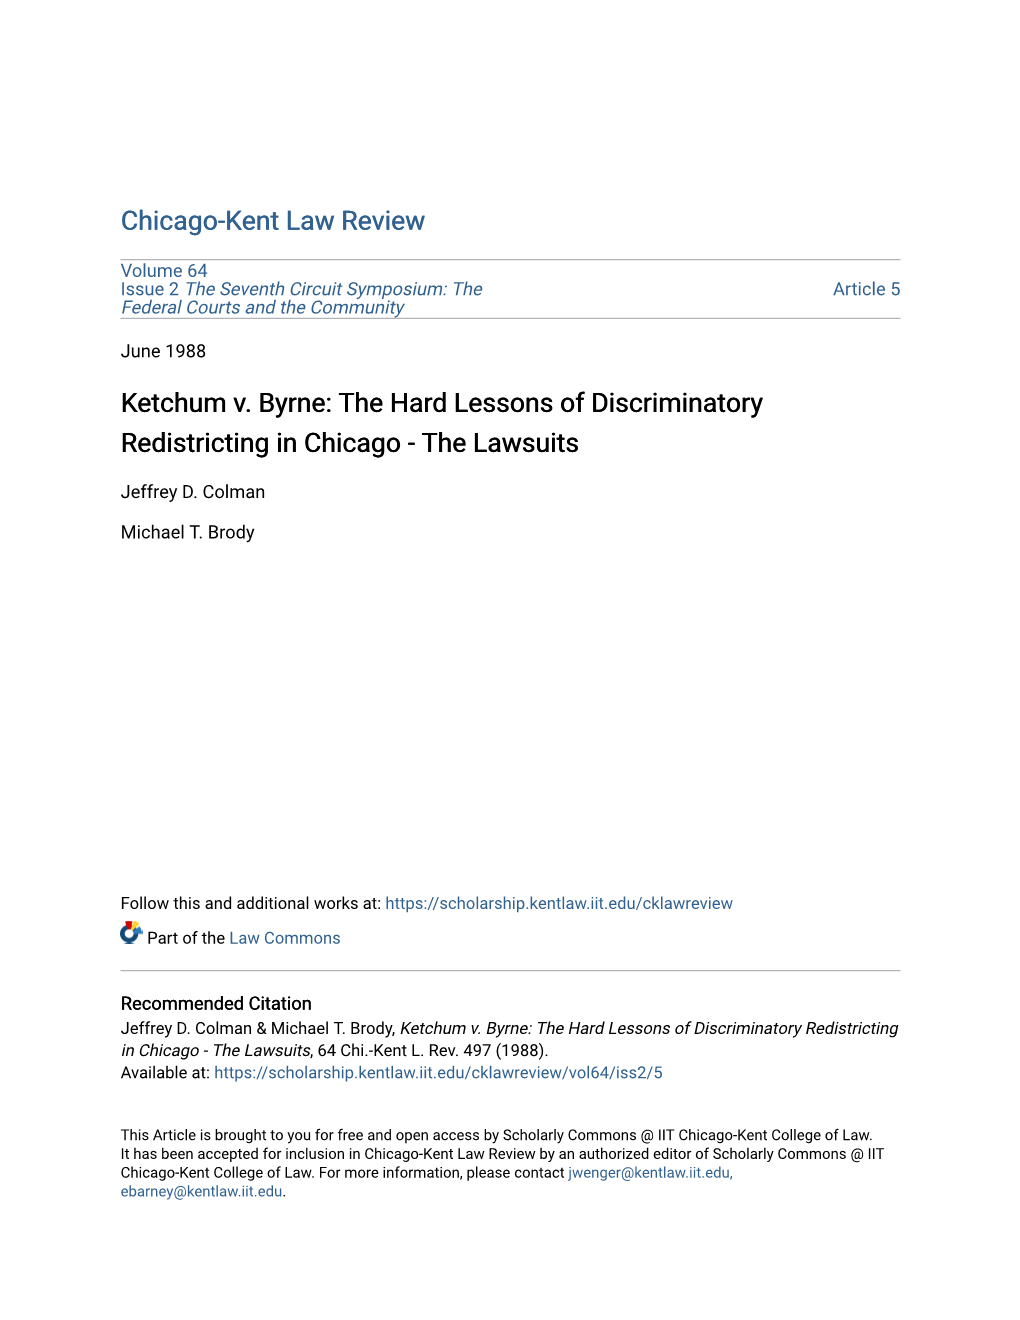 Ketchum V. Byrne: the Hard Lessons of Discriminatory Redistricting in Chicago - the Lawsuits